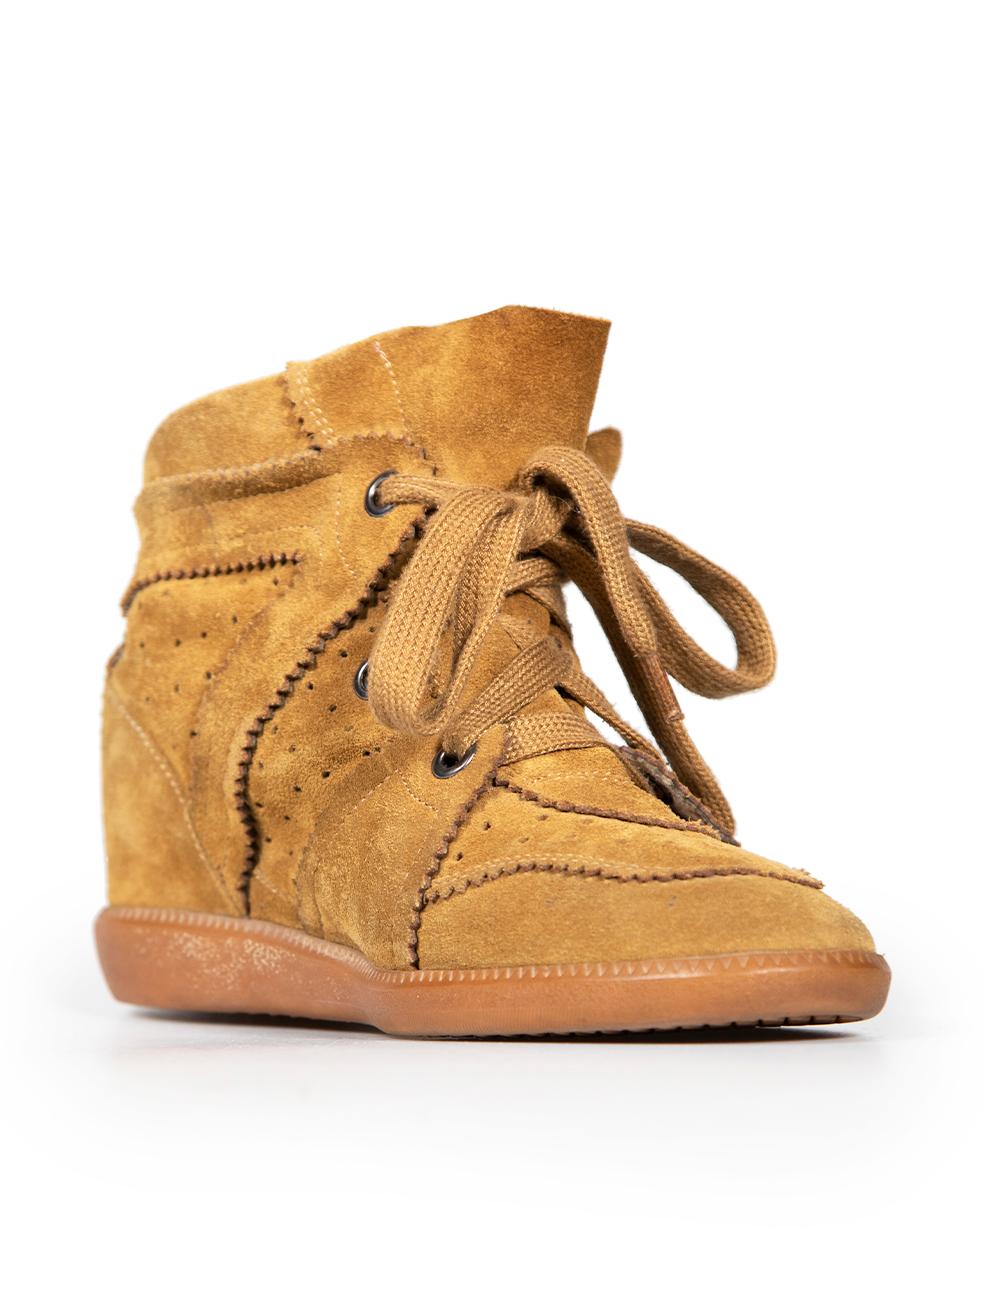 CONDITION is Very good. Minimal wear to shoes is evident. Minimal wear to both shoe outsoles with marks to the rubber on this used Isabel Marant designer resale item.
 
 
 
 Details
 
 
 Brown
 
 Suede
 
 Wedge trainers
 
 Lace up fastening
 
 Round